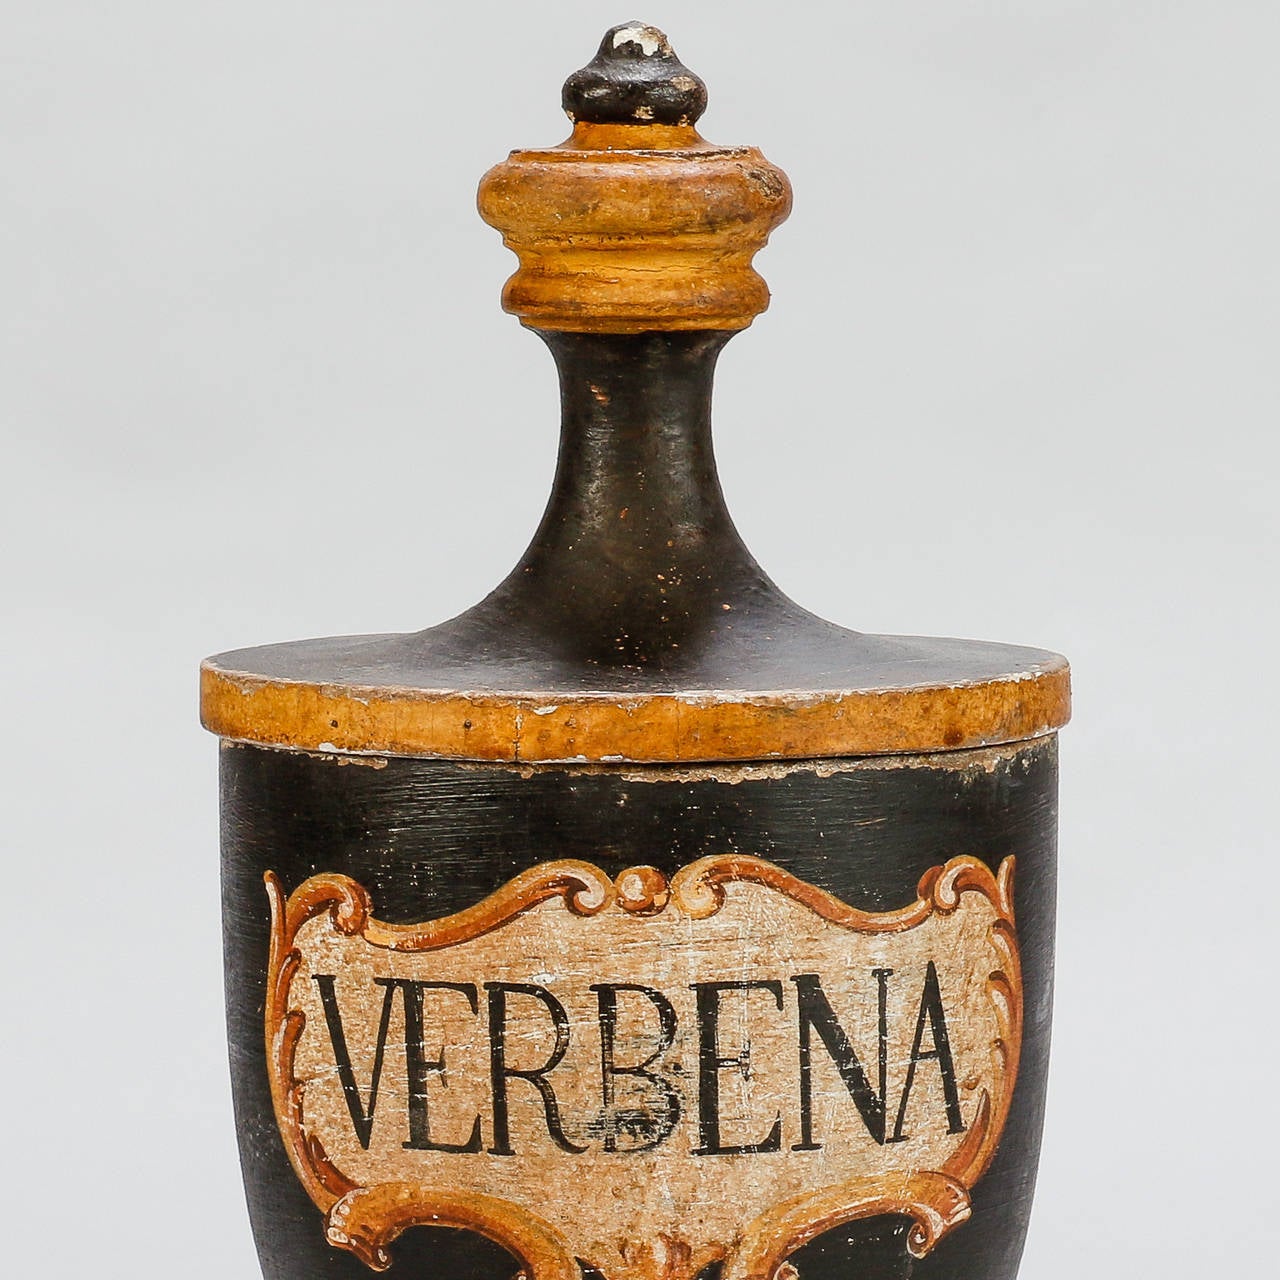 Tall lidded wood herb jar found in Italy, circa 1890s. Pedestal base, turned wood vessel with tall lid and original painted finish. Three jars currently available. The painted herb labels include: Melissa, Senna, Angelica & Betulla. Sold and priced